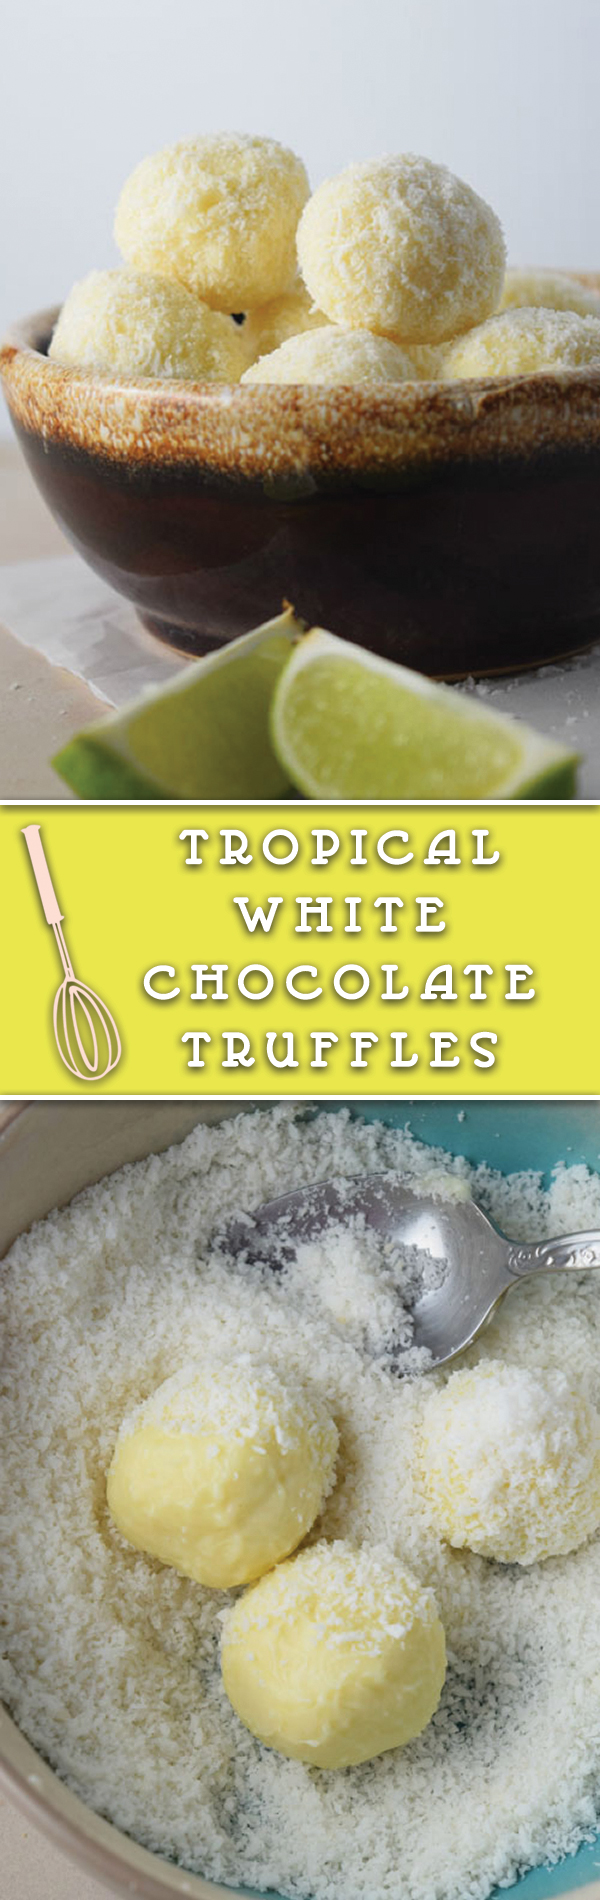 Tropical White Chocolate Truffles :- Delicious white chocolate truffles coated with coconut. They are a perfect treat!